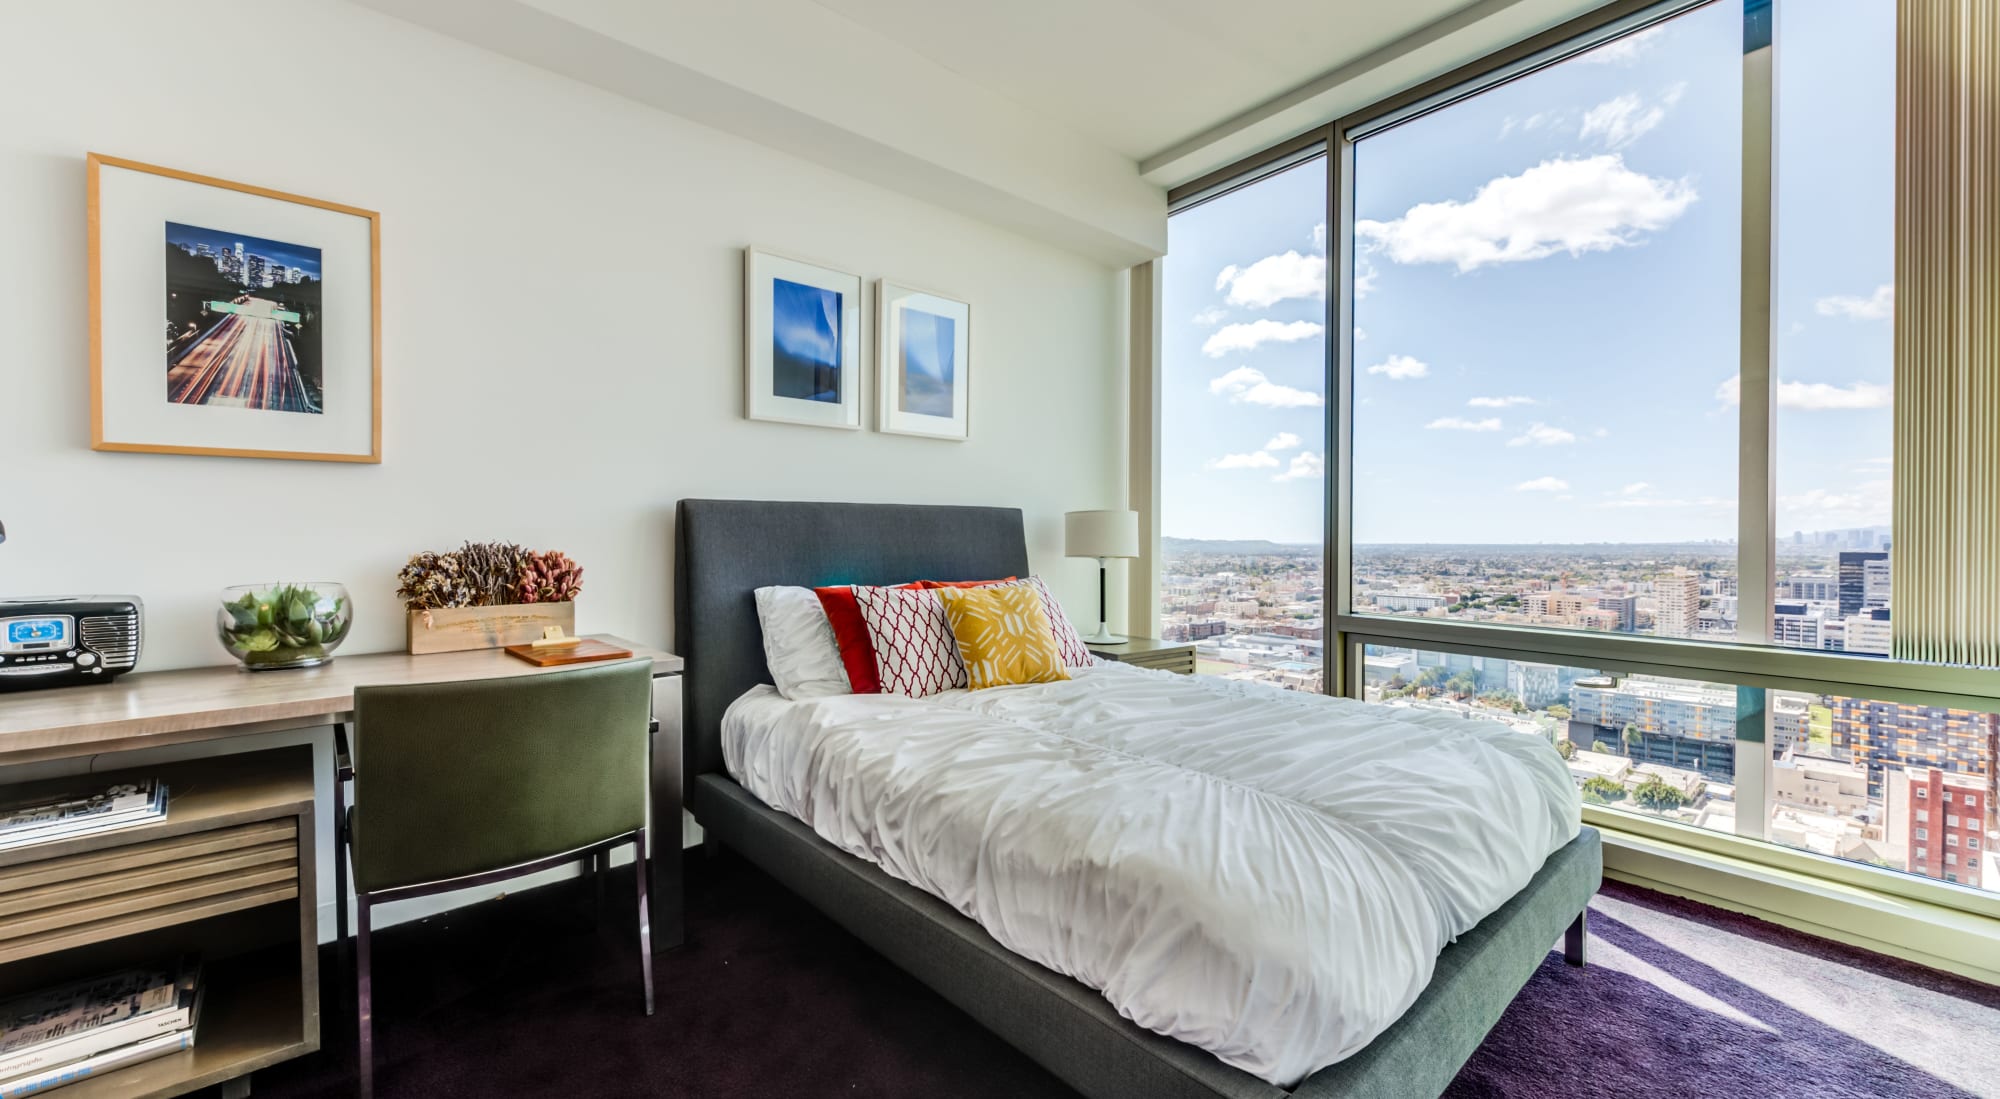 Well decorated bedroom with city view at The Vermont in Los Angeles, California